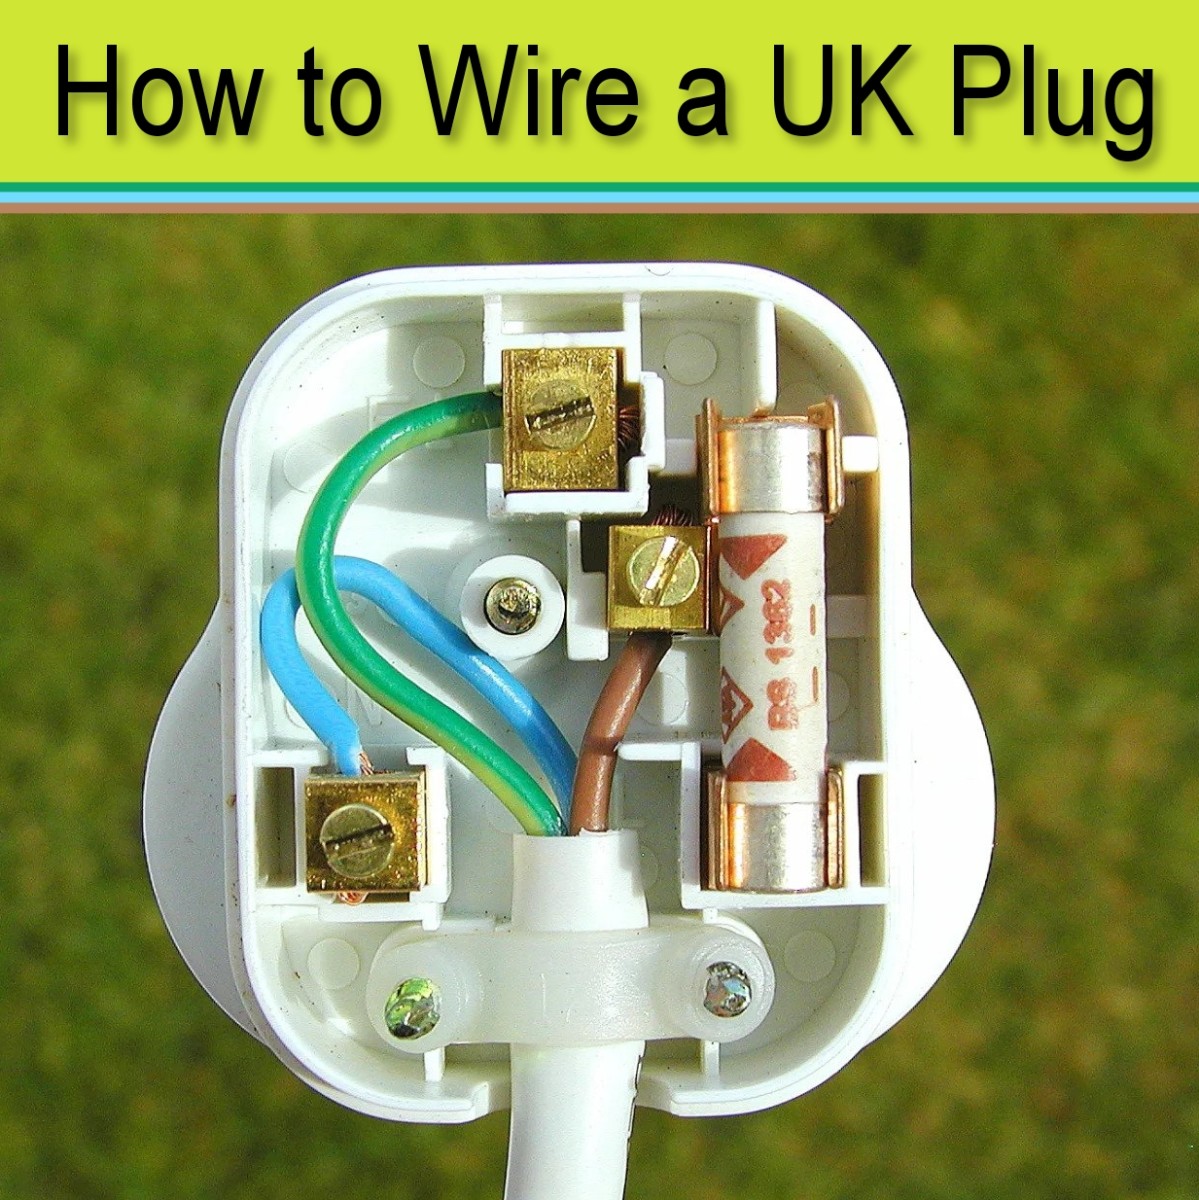 How to wire a plug. This is a UK style, BS1363 plug with integral 13 amp fuse.